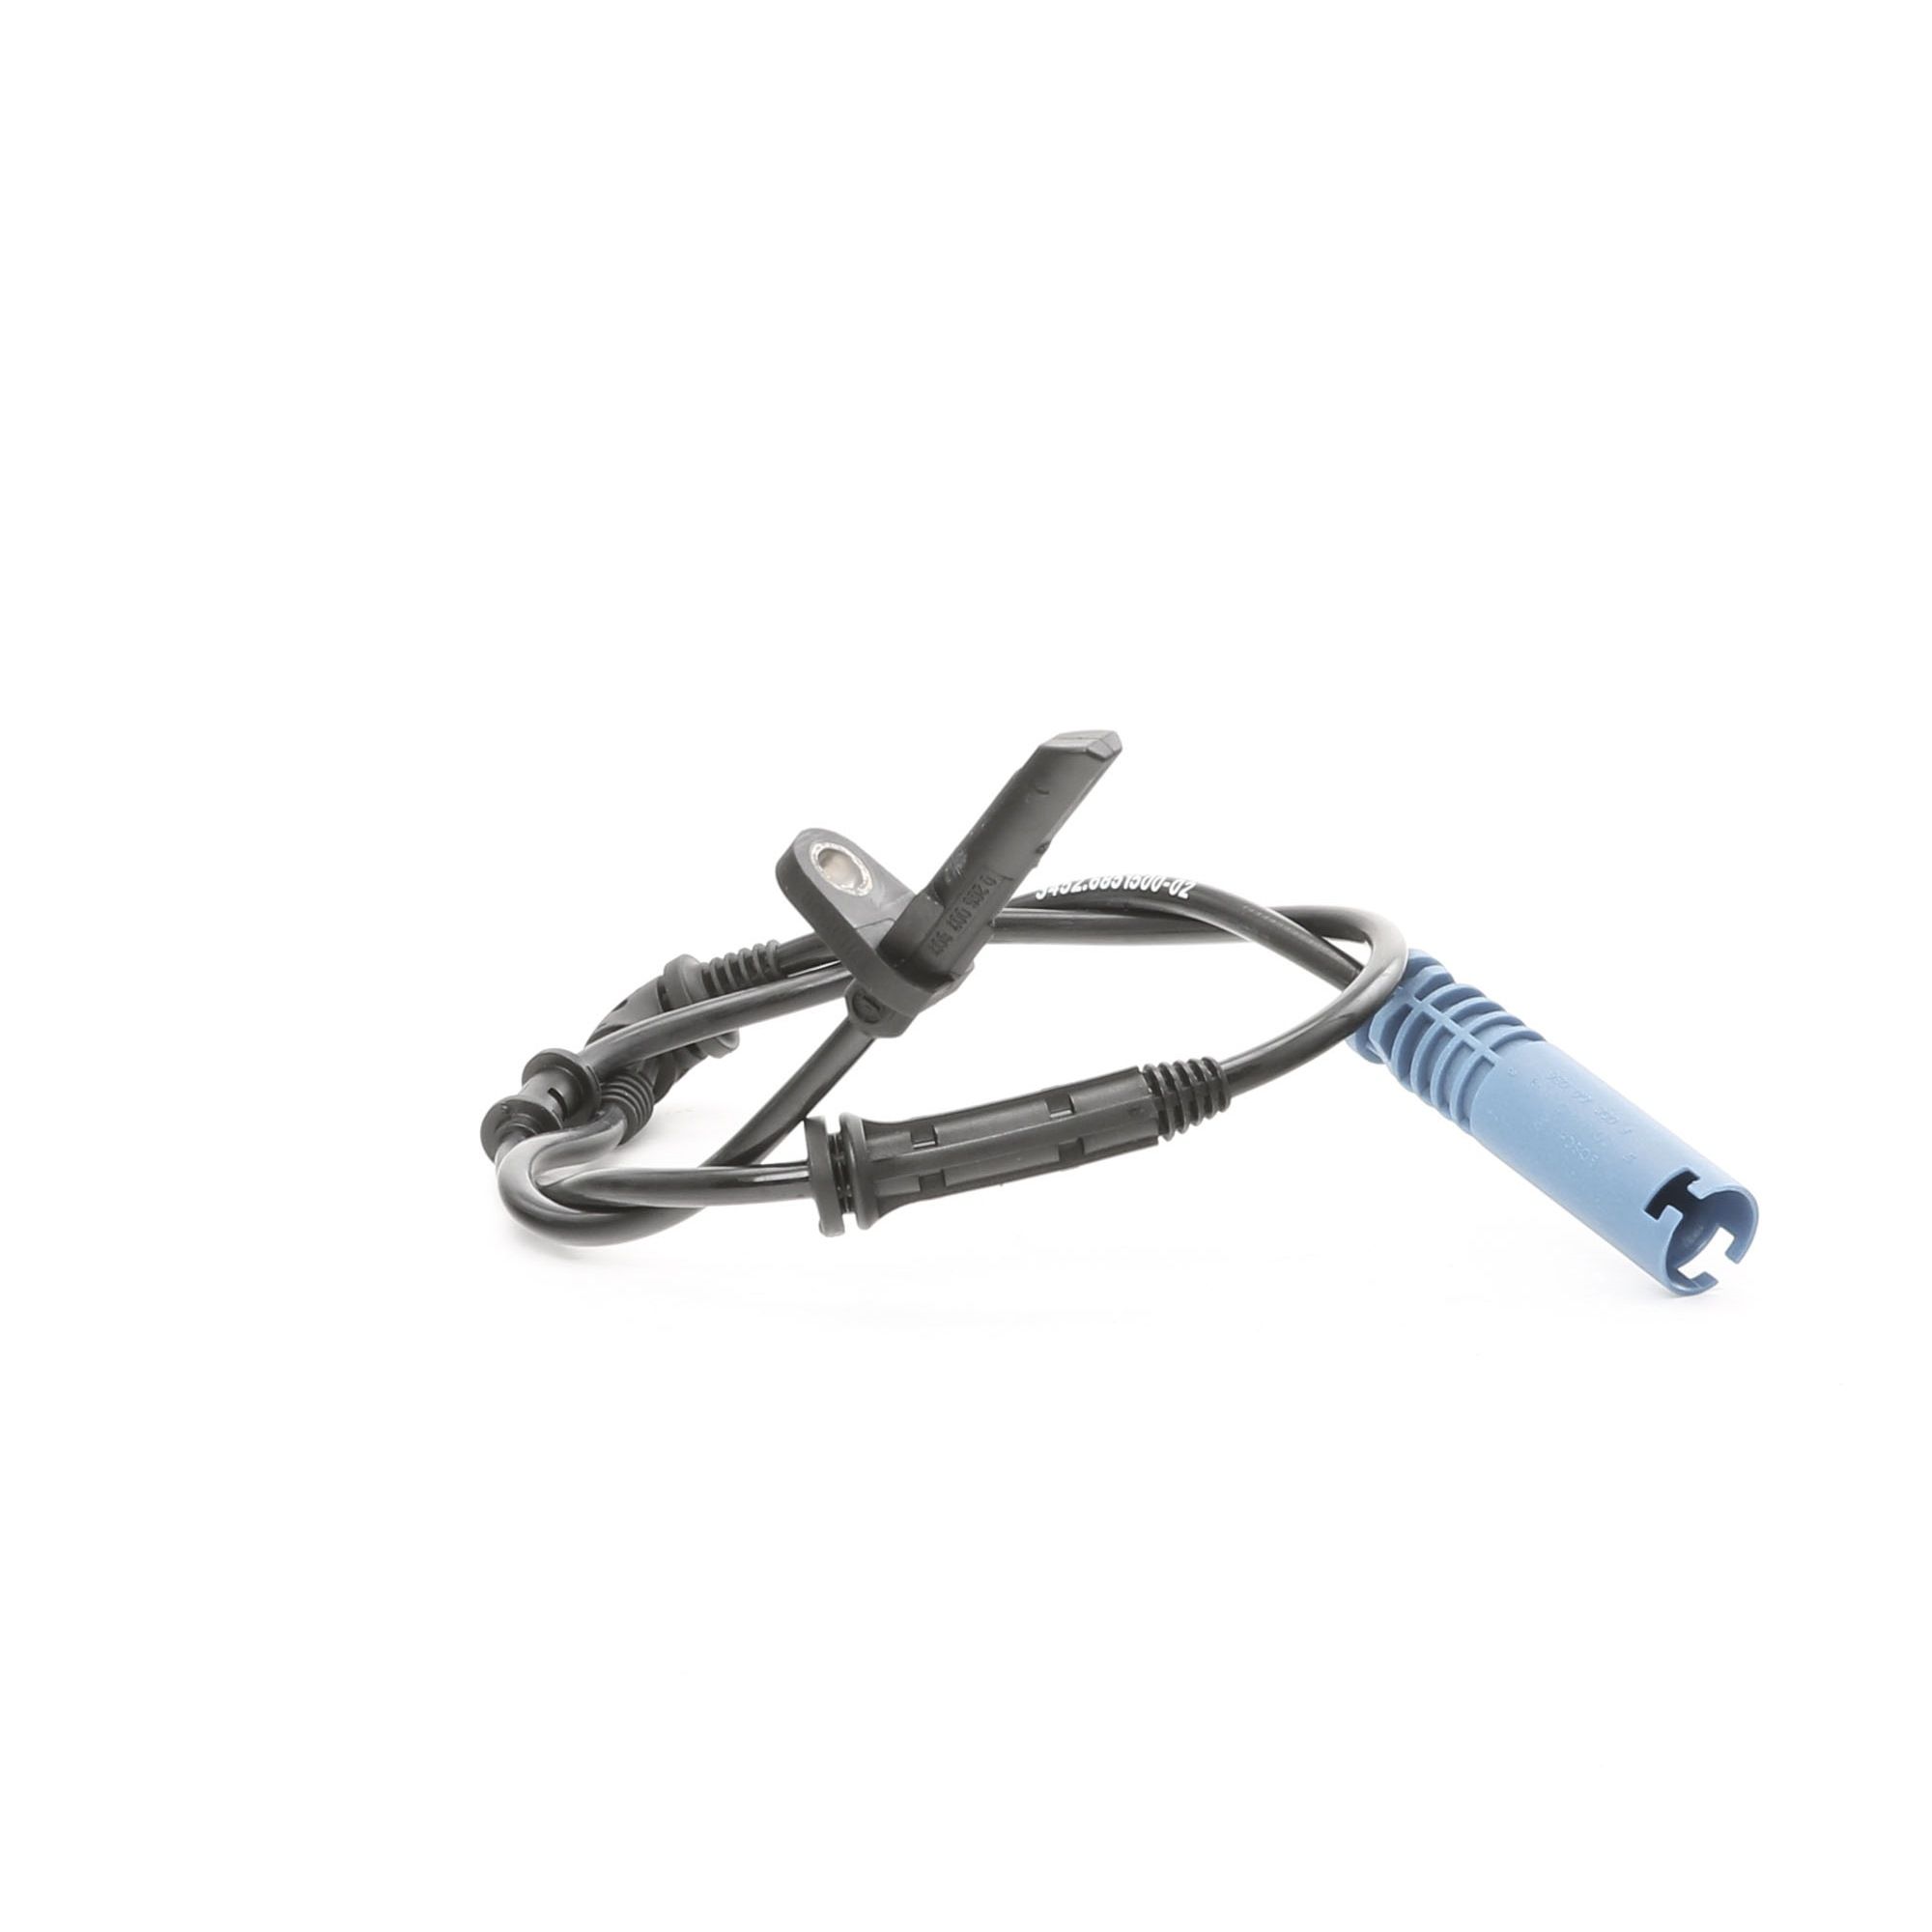 DF 11 BOSCH with cable, Hall Sensor, 751mm Total Length: 751mm Sensor, wheel speed 0 265 007 807 buy